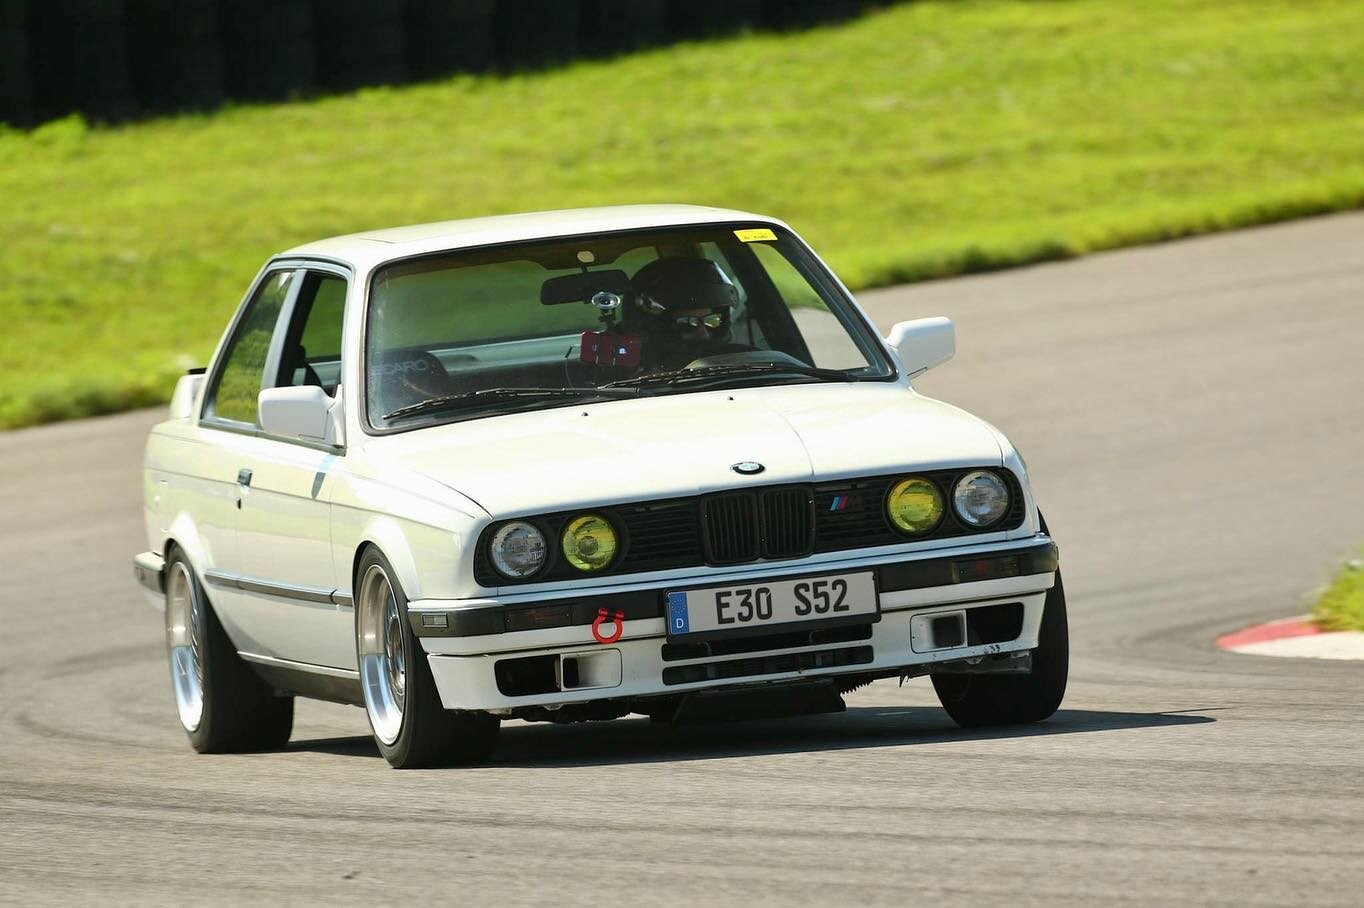 A timeless classic, yet still a popular platform for track &amp; racing fun. Our customer Kevin Bruns from the Southeast loves his Cobalt XR2&rsquo;s. 

&ldquo;I have a 1991 BMW E30 that I take to local track days at NCM Motorsports park and Nashvill